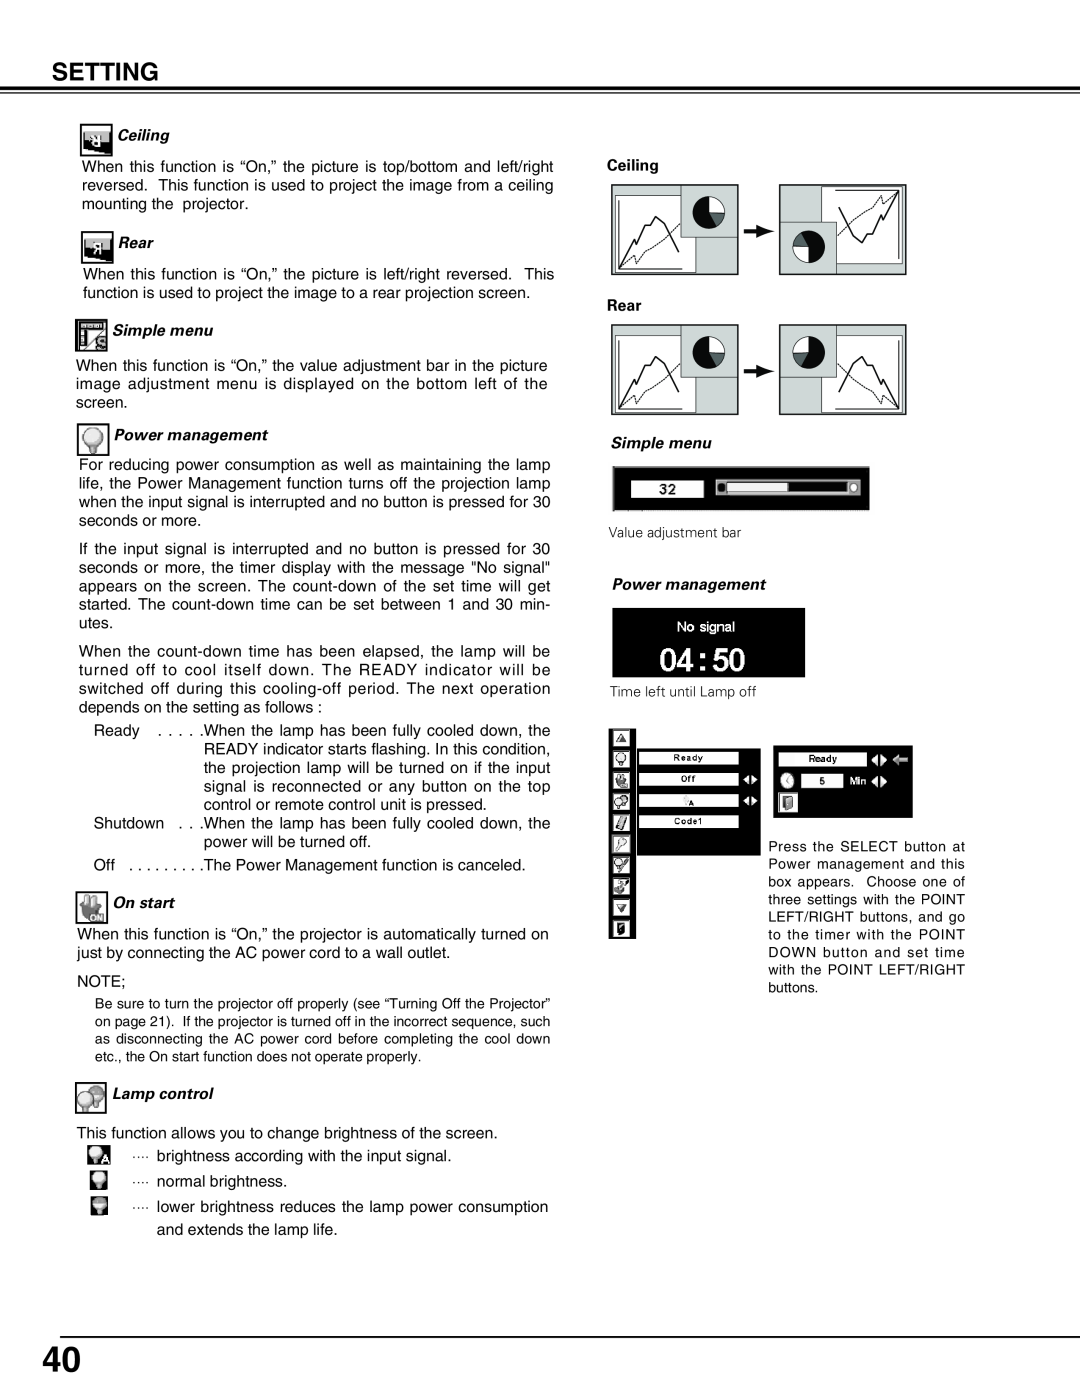 Eiki LC-W3 instruction manual Ceiling, Rear, Simple menu, Power management, On start, Lamp control 